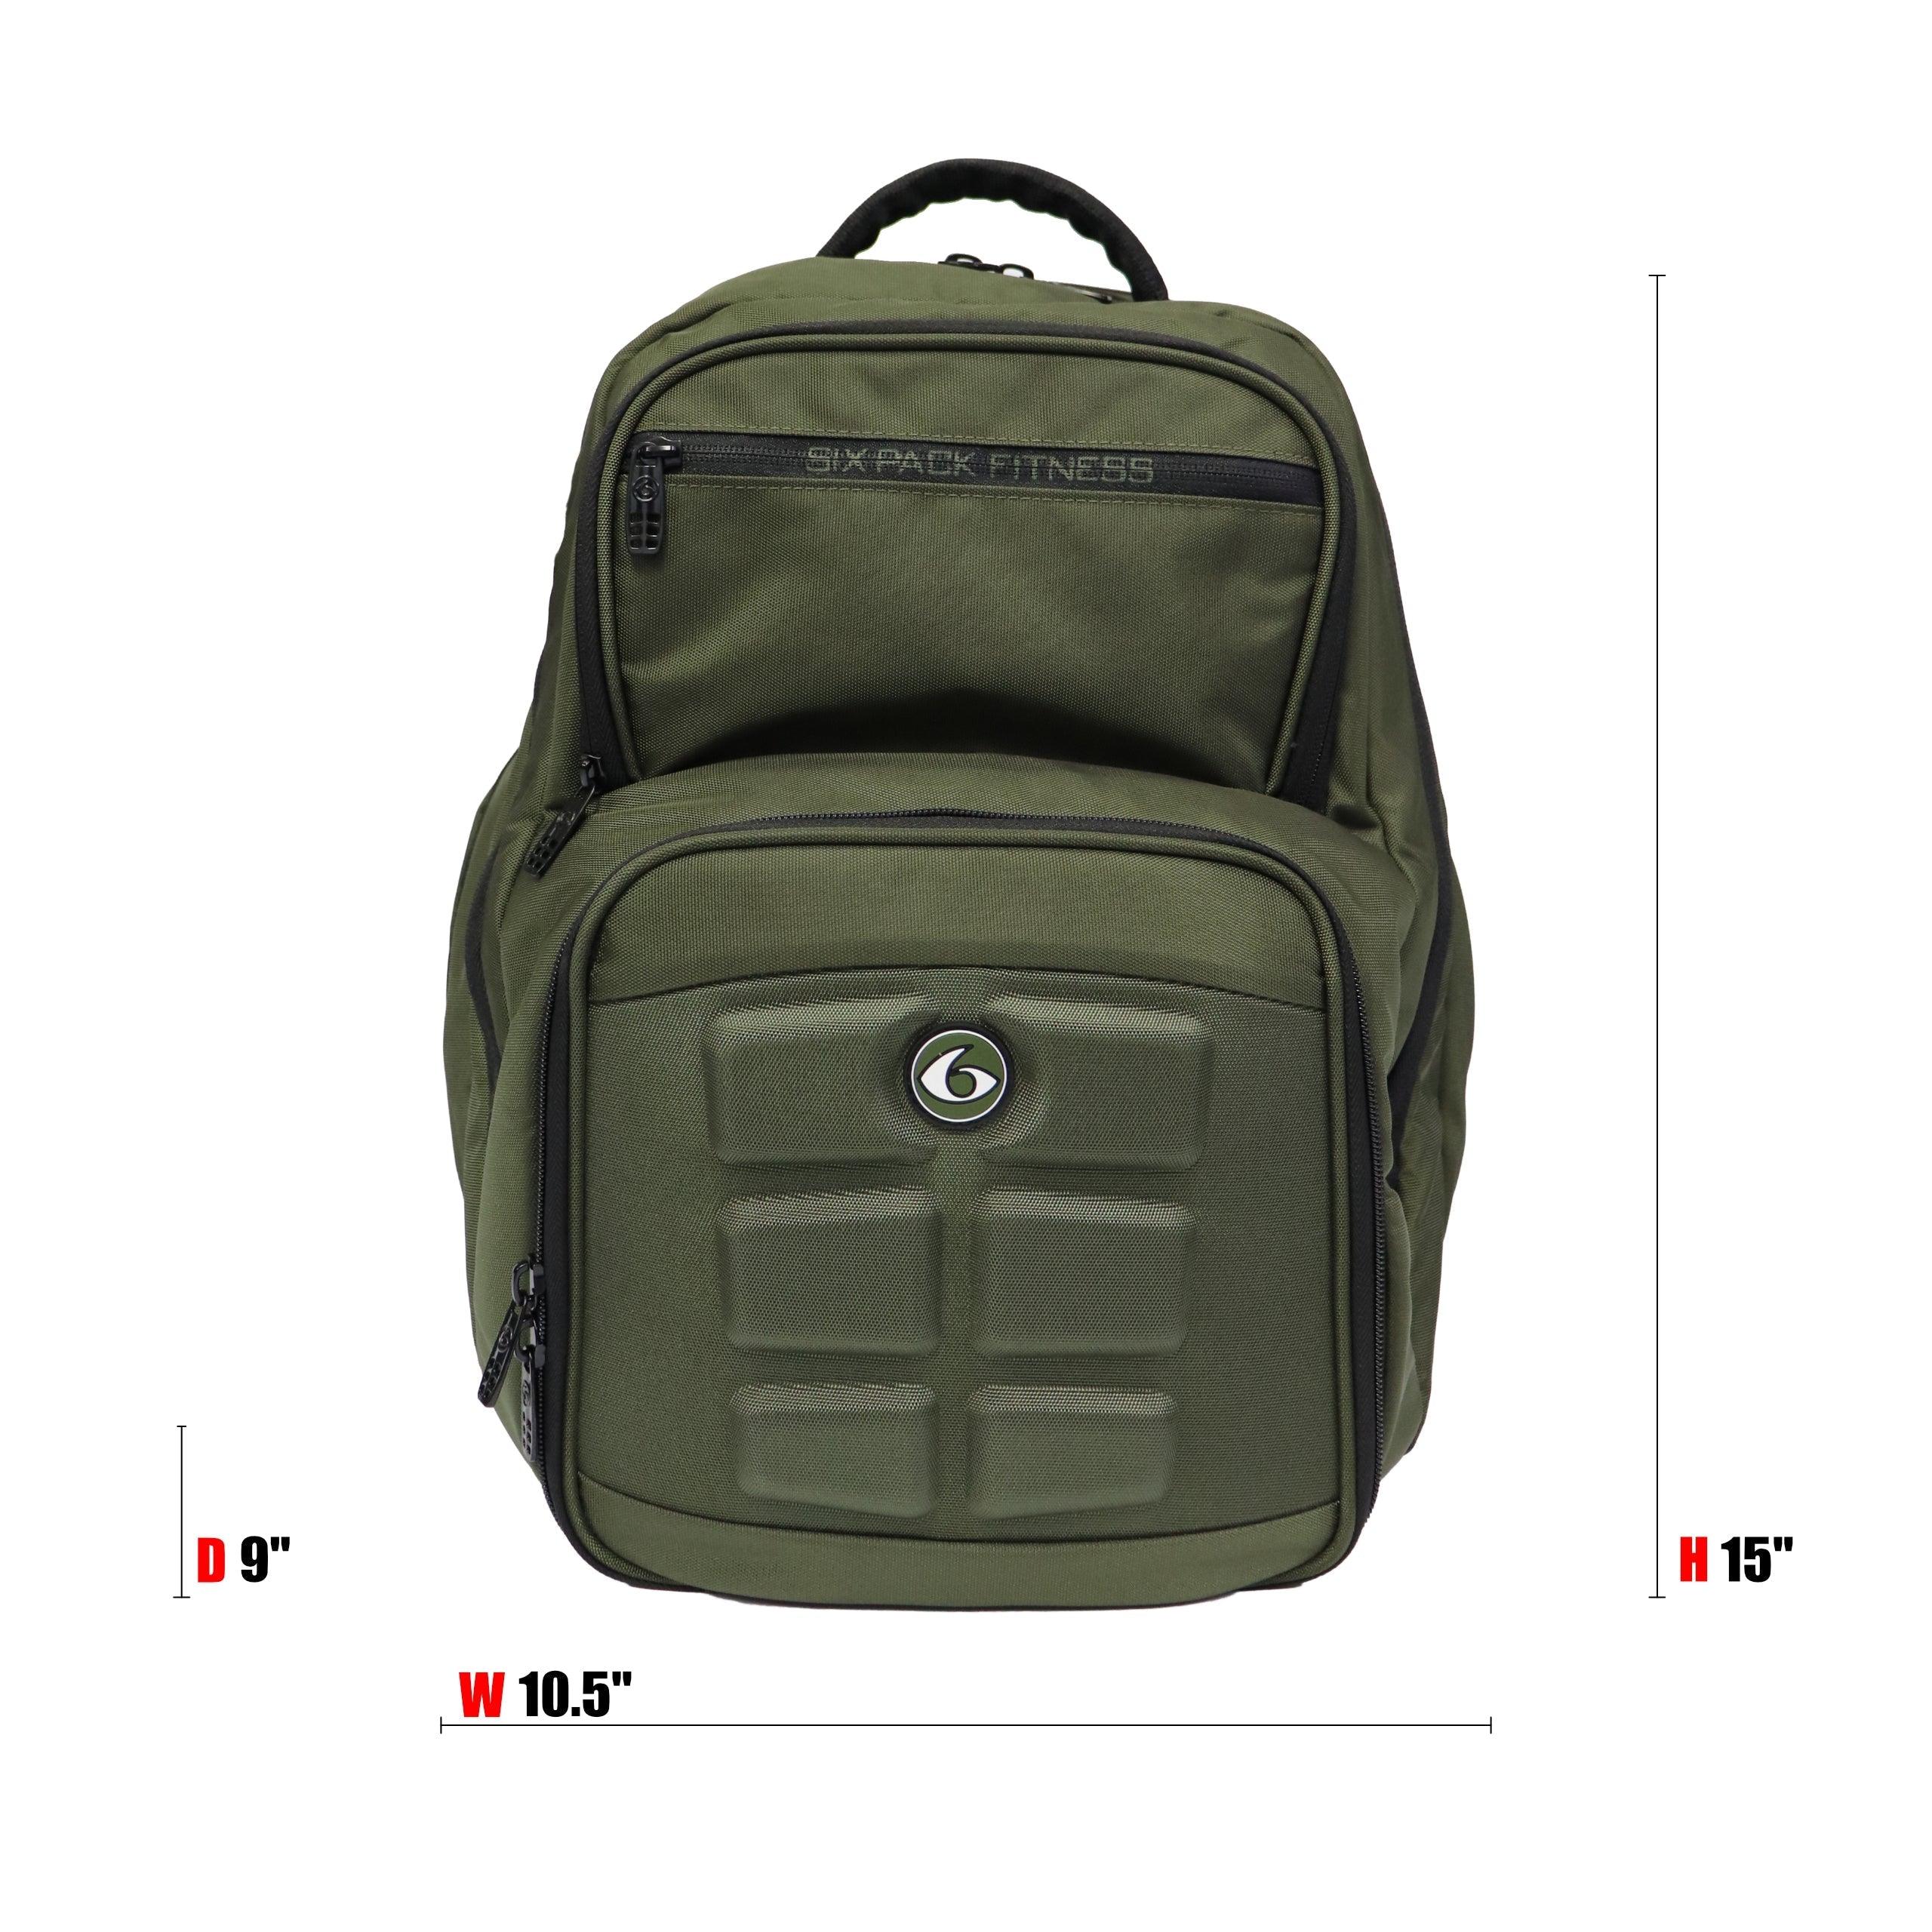 Innovator Expedition 300 Backpack Meal Prep Management Bag (Olive) - sixpackbags